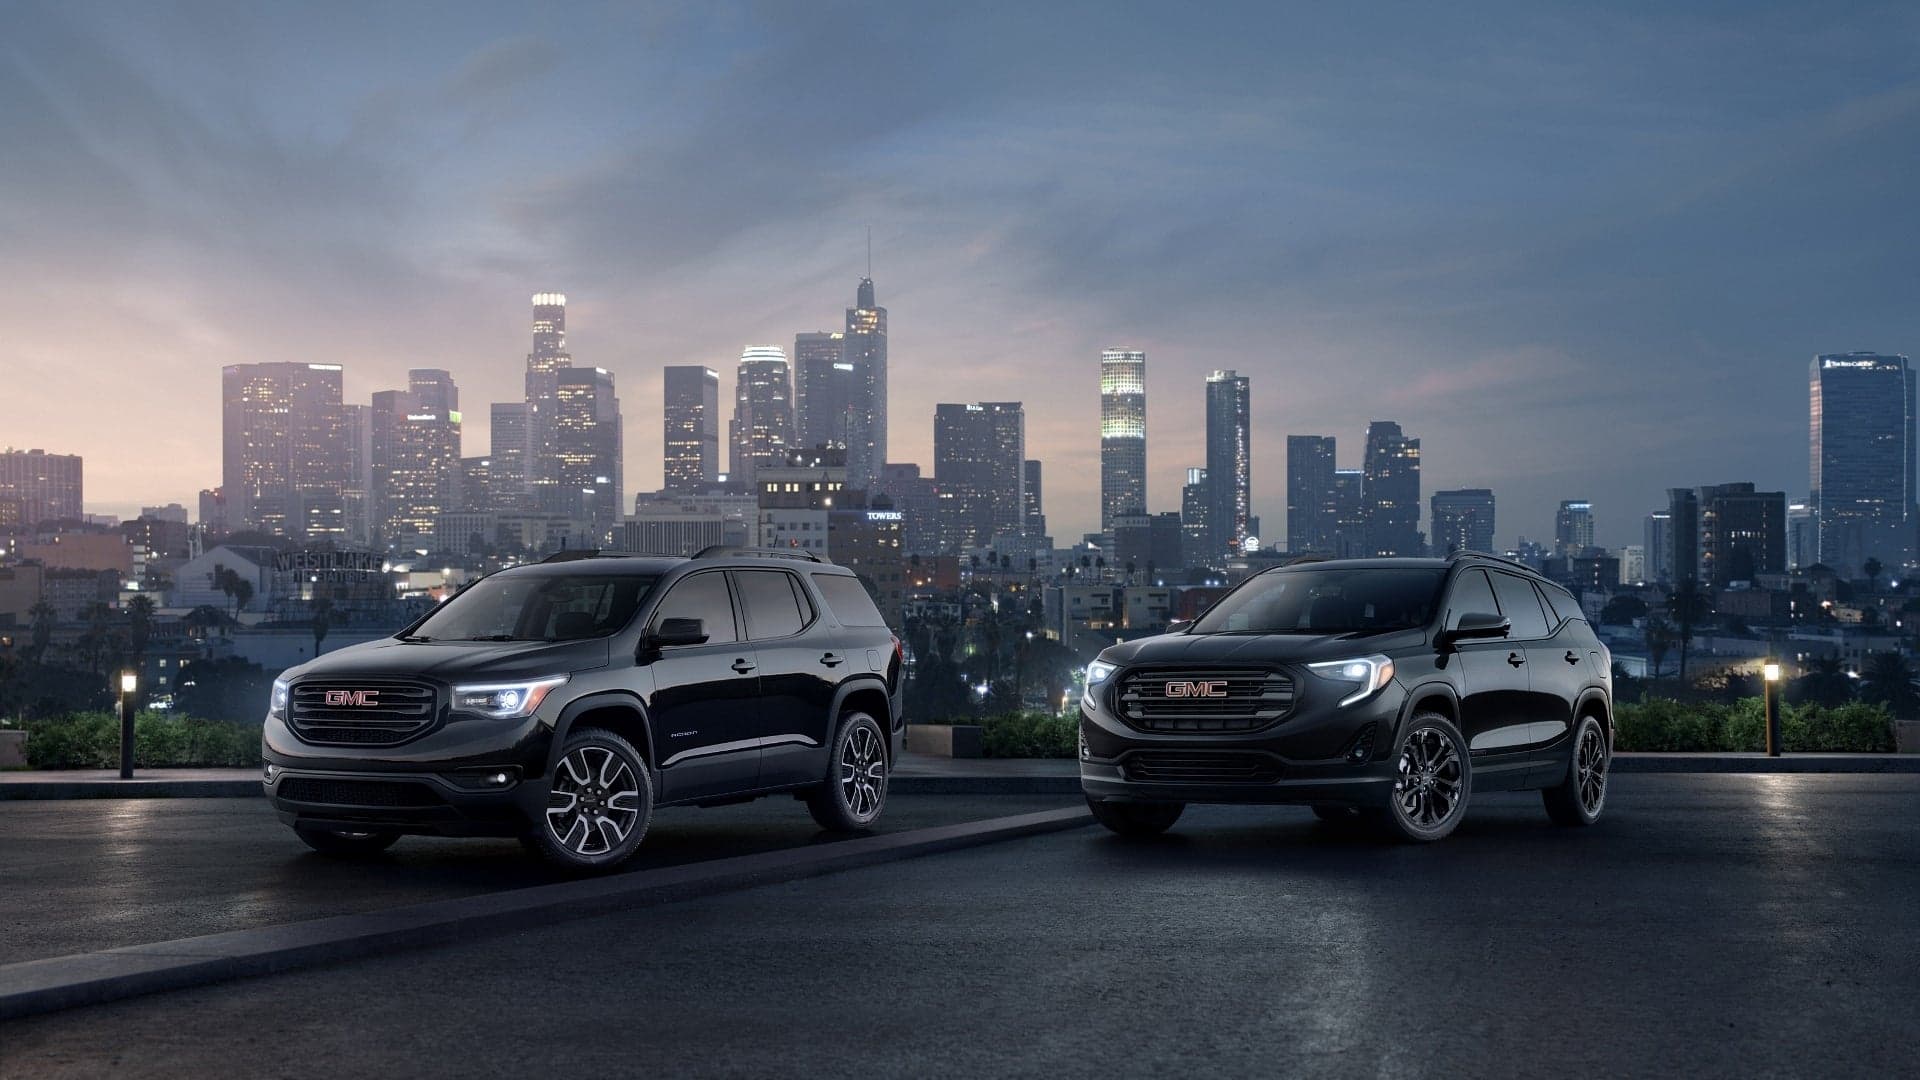 GMC Introduces Black Editions for Terrain and Acadia SUVs